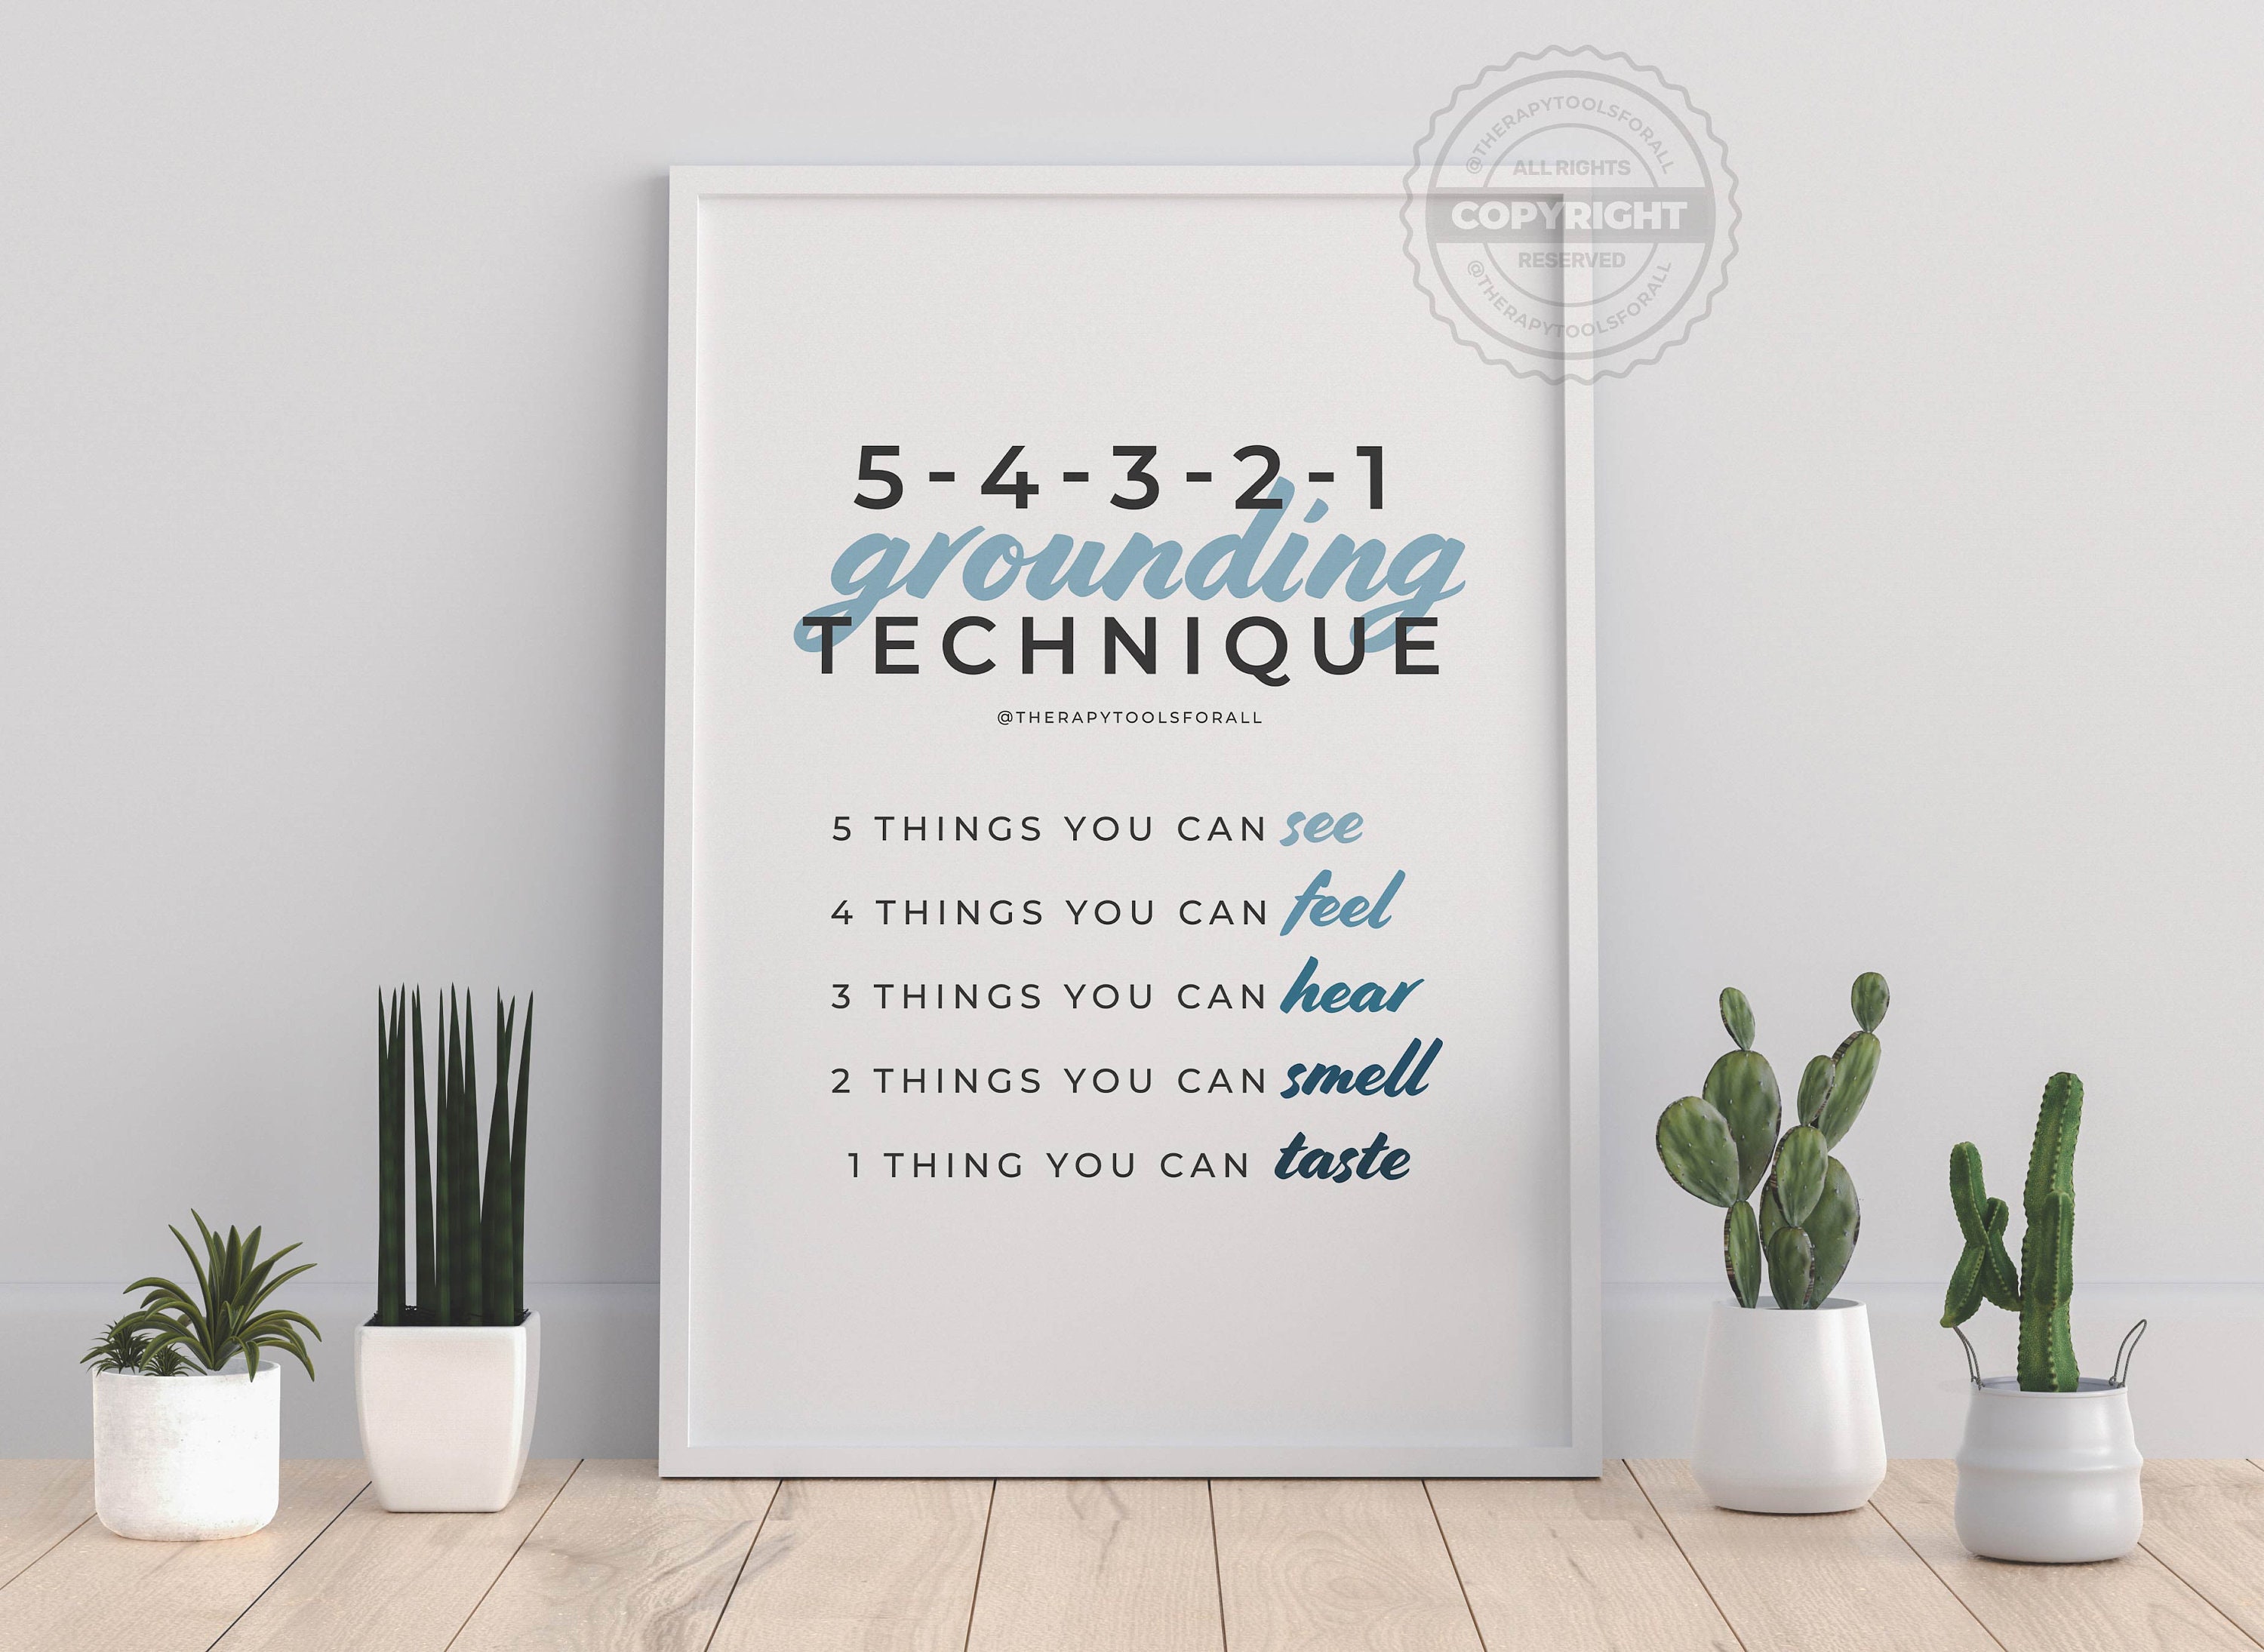 Inspirational Therapy Office Classroom Desk Decor, School Counselor Office  Must Haves, Mental Health Decor Gifts for Women Men - a03